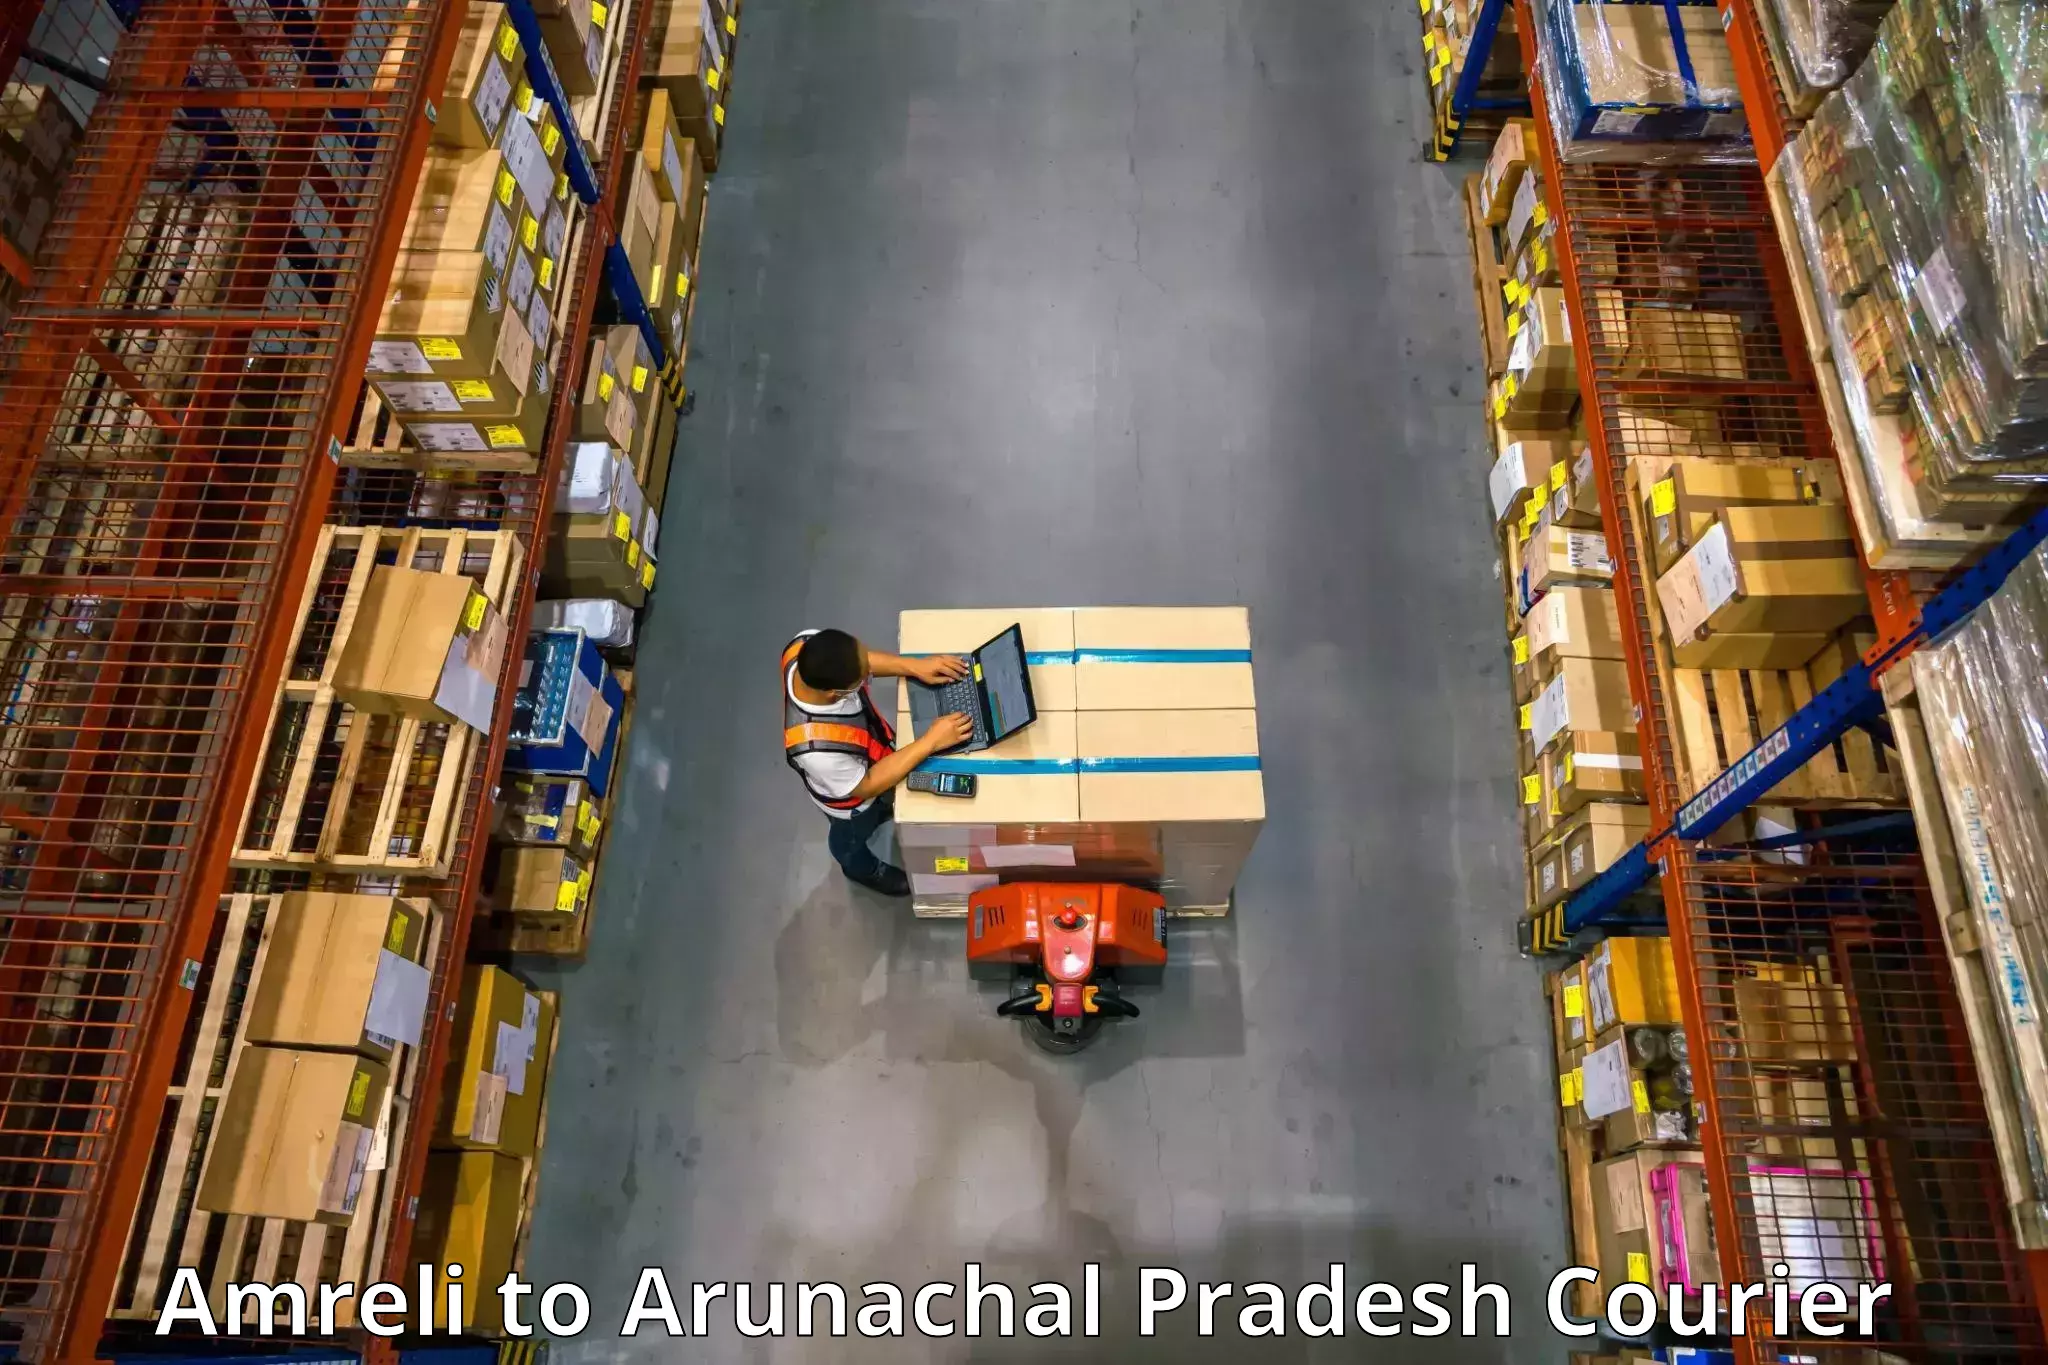 Furniture delivery service Amreli to Boleng